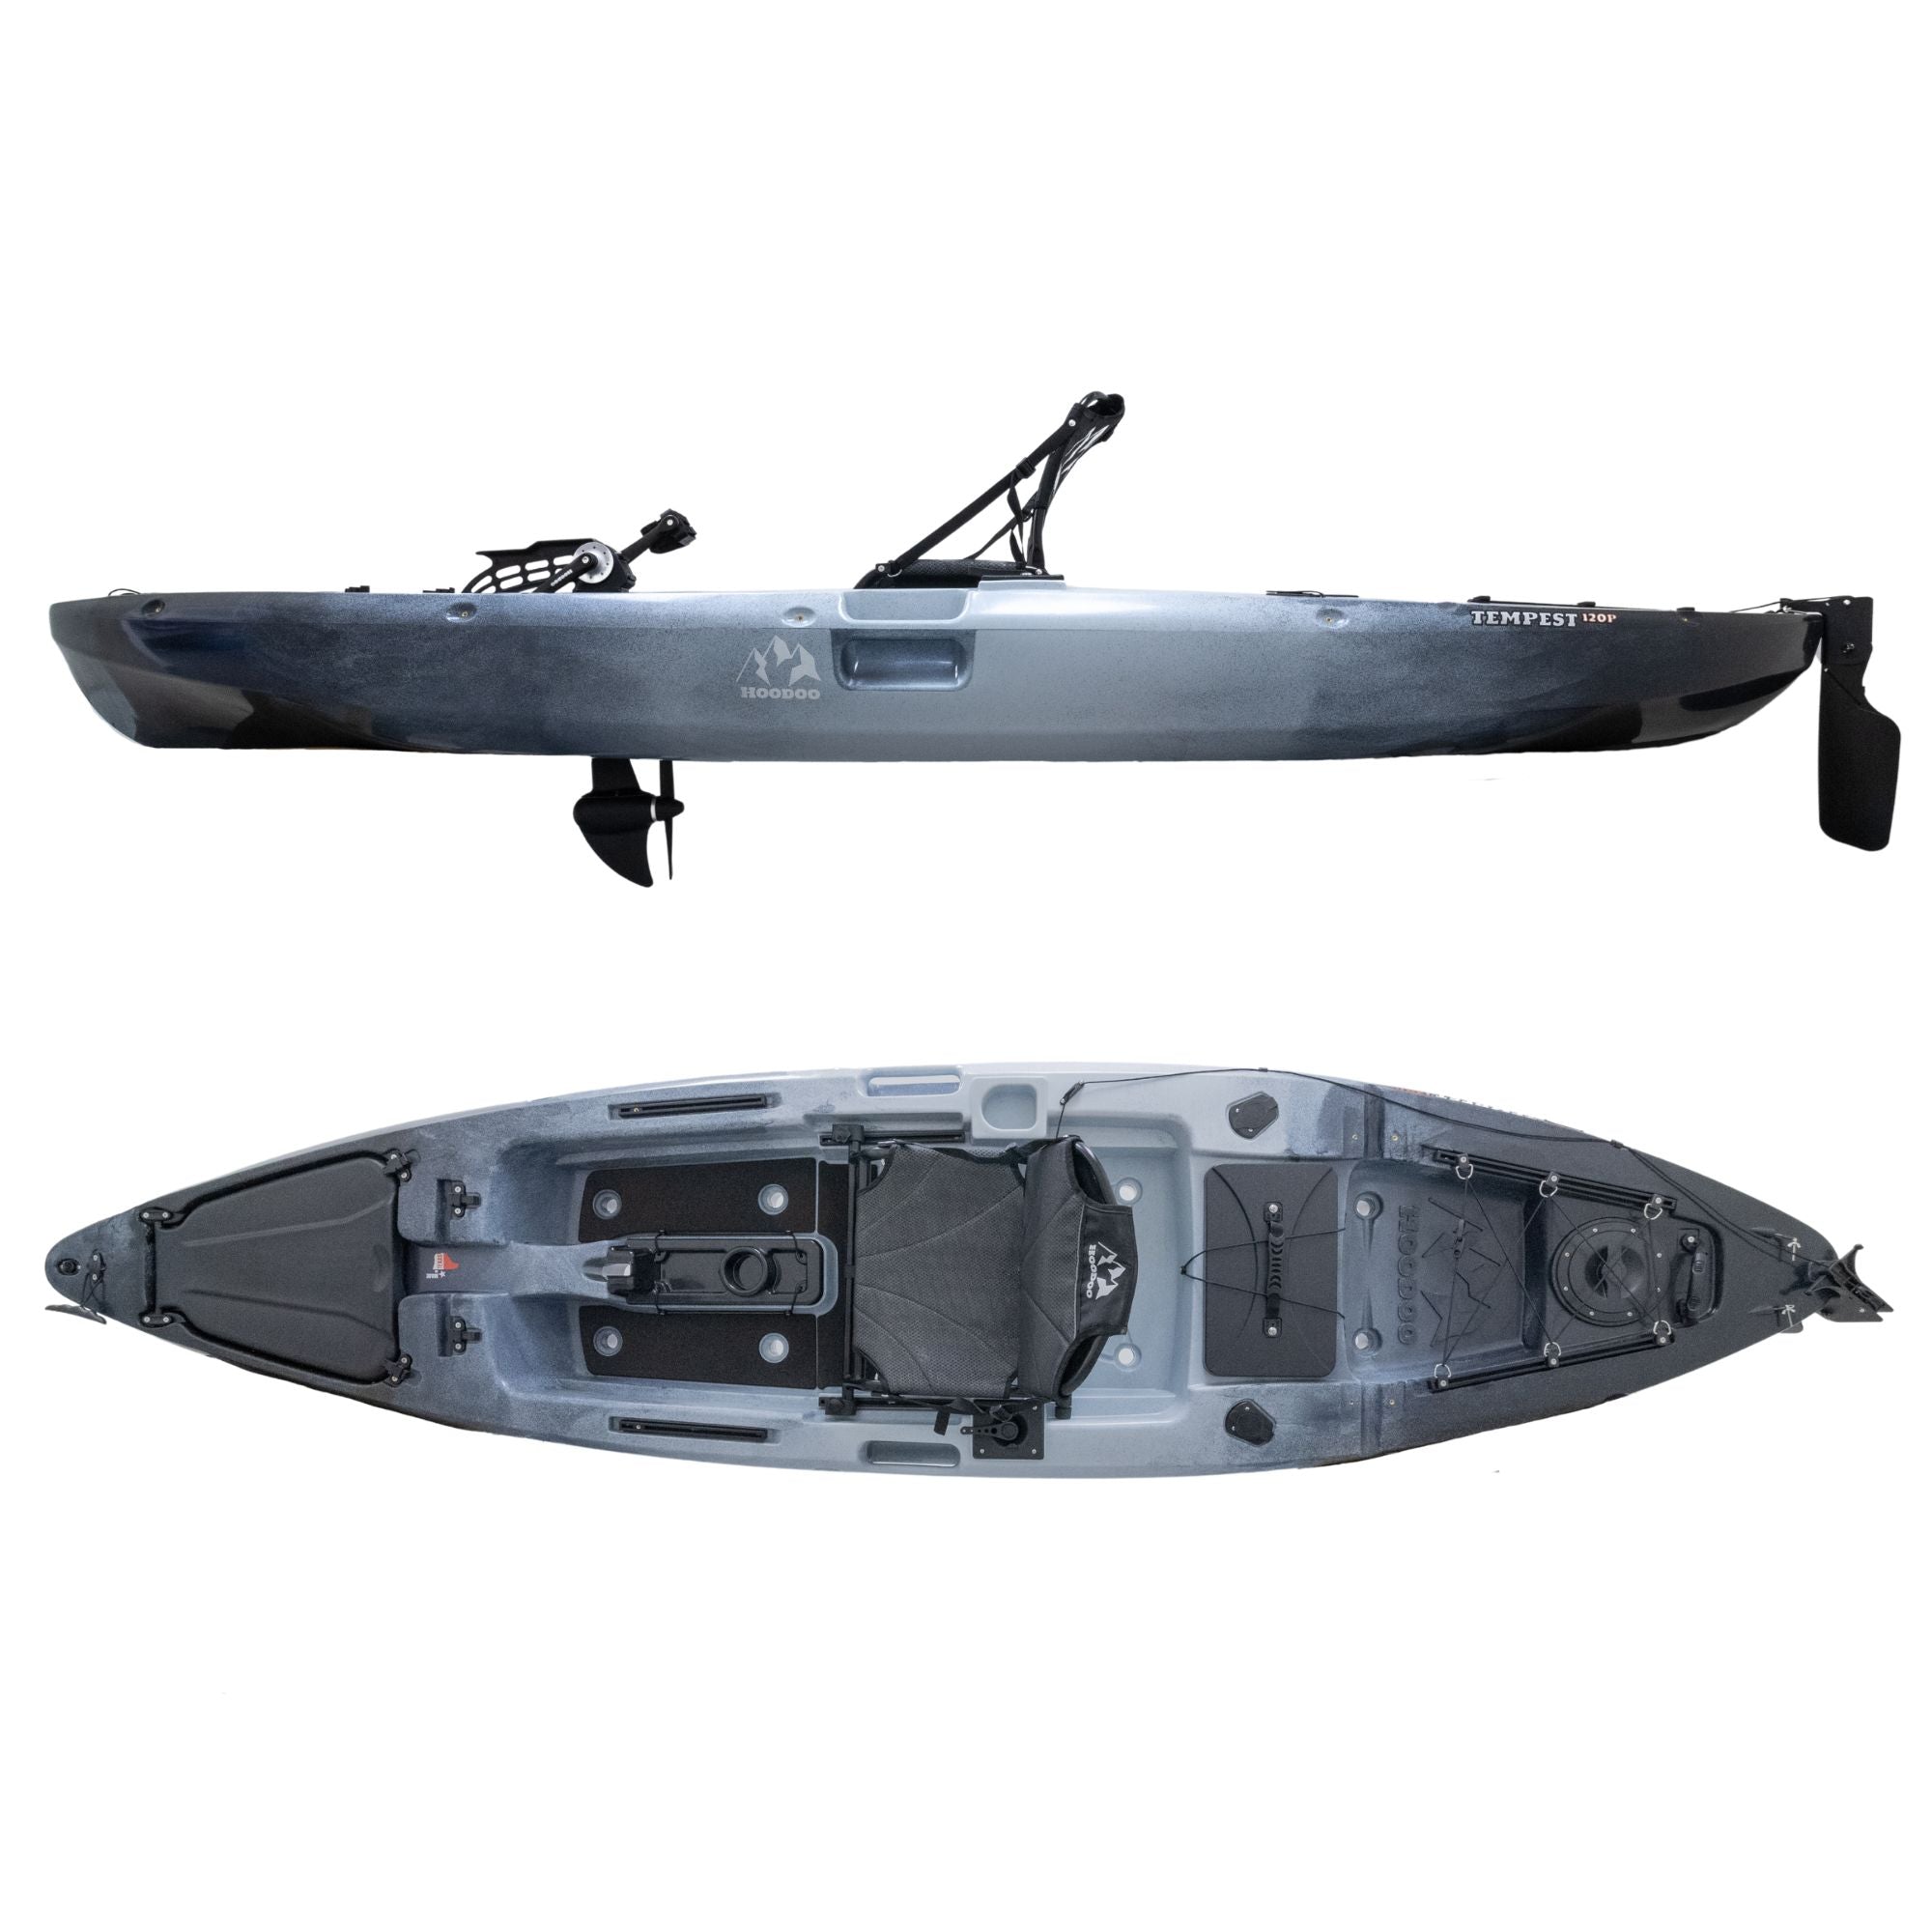 Hoodoo Tempest 120P, Pedal Drive Kayak, Made in Texas